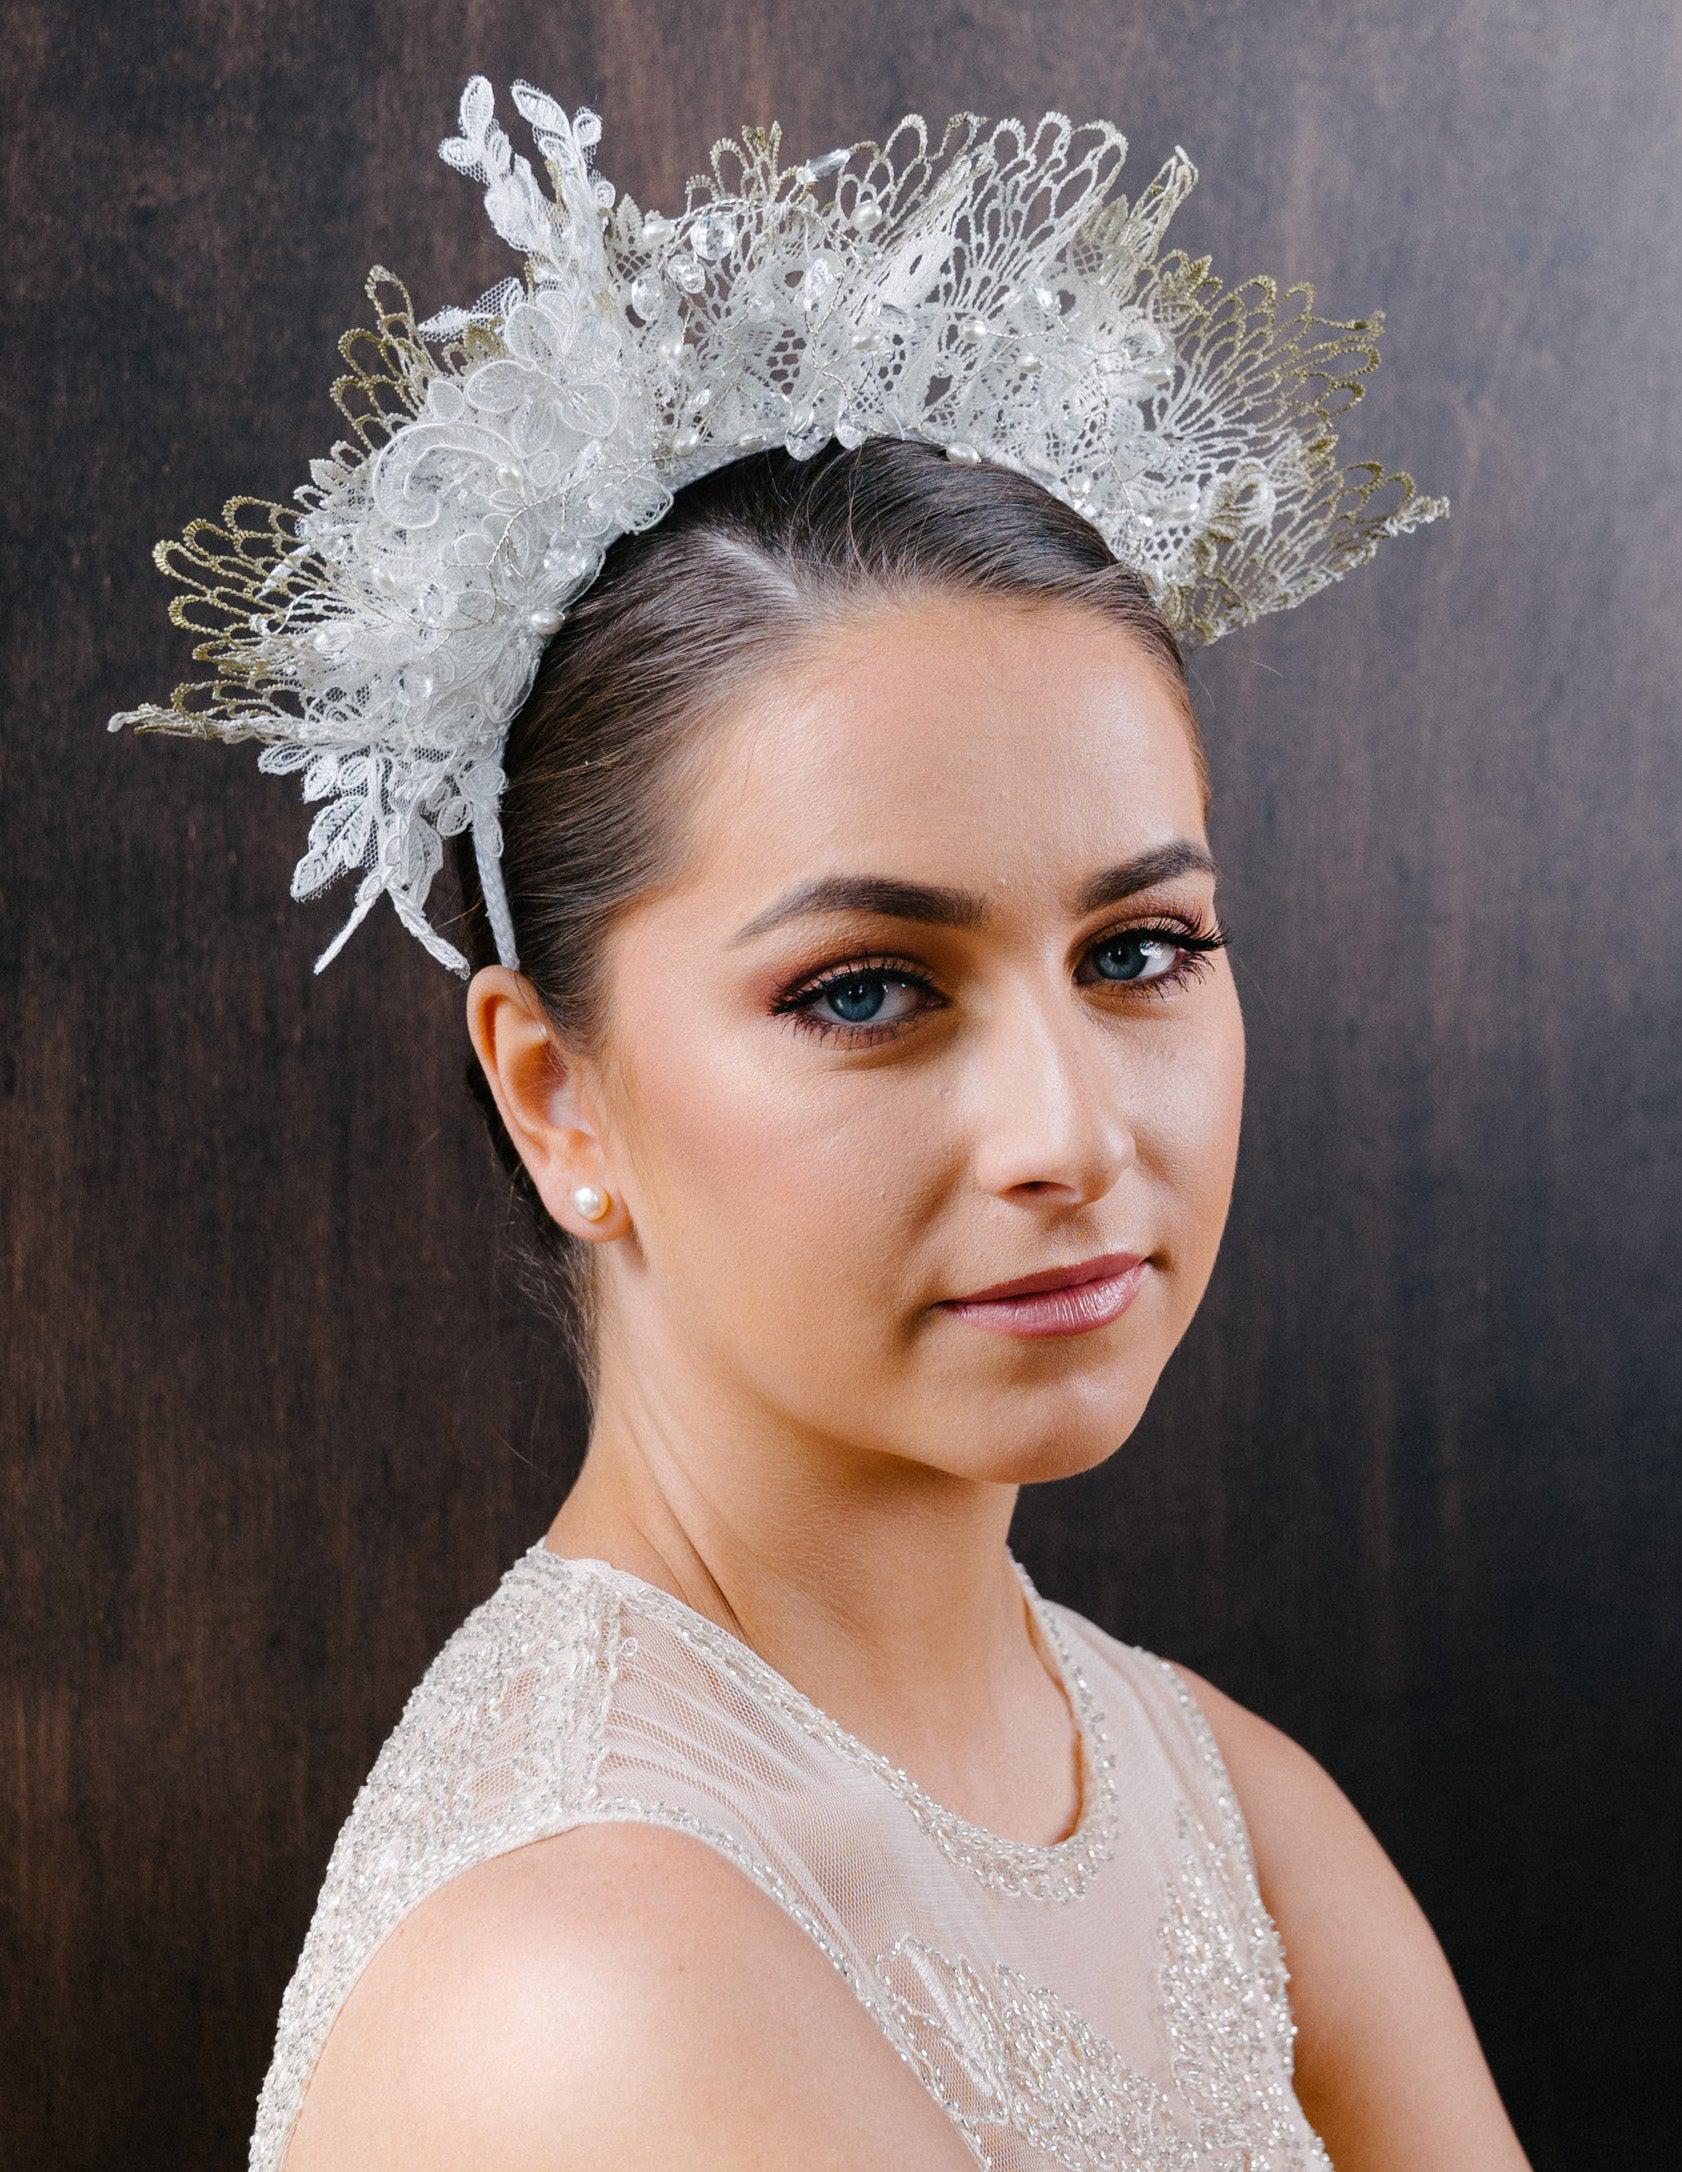 Bridal Crown in Lace Headband